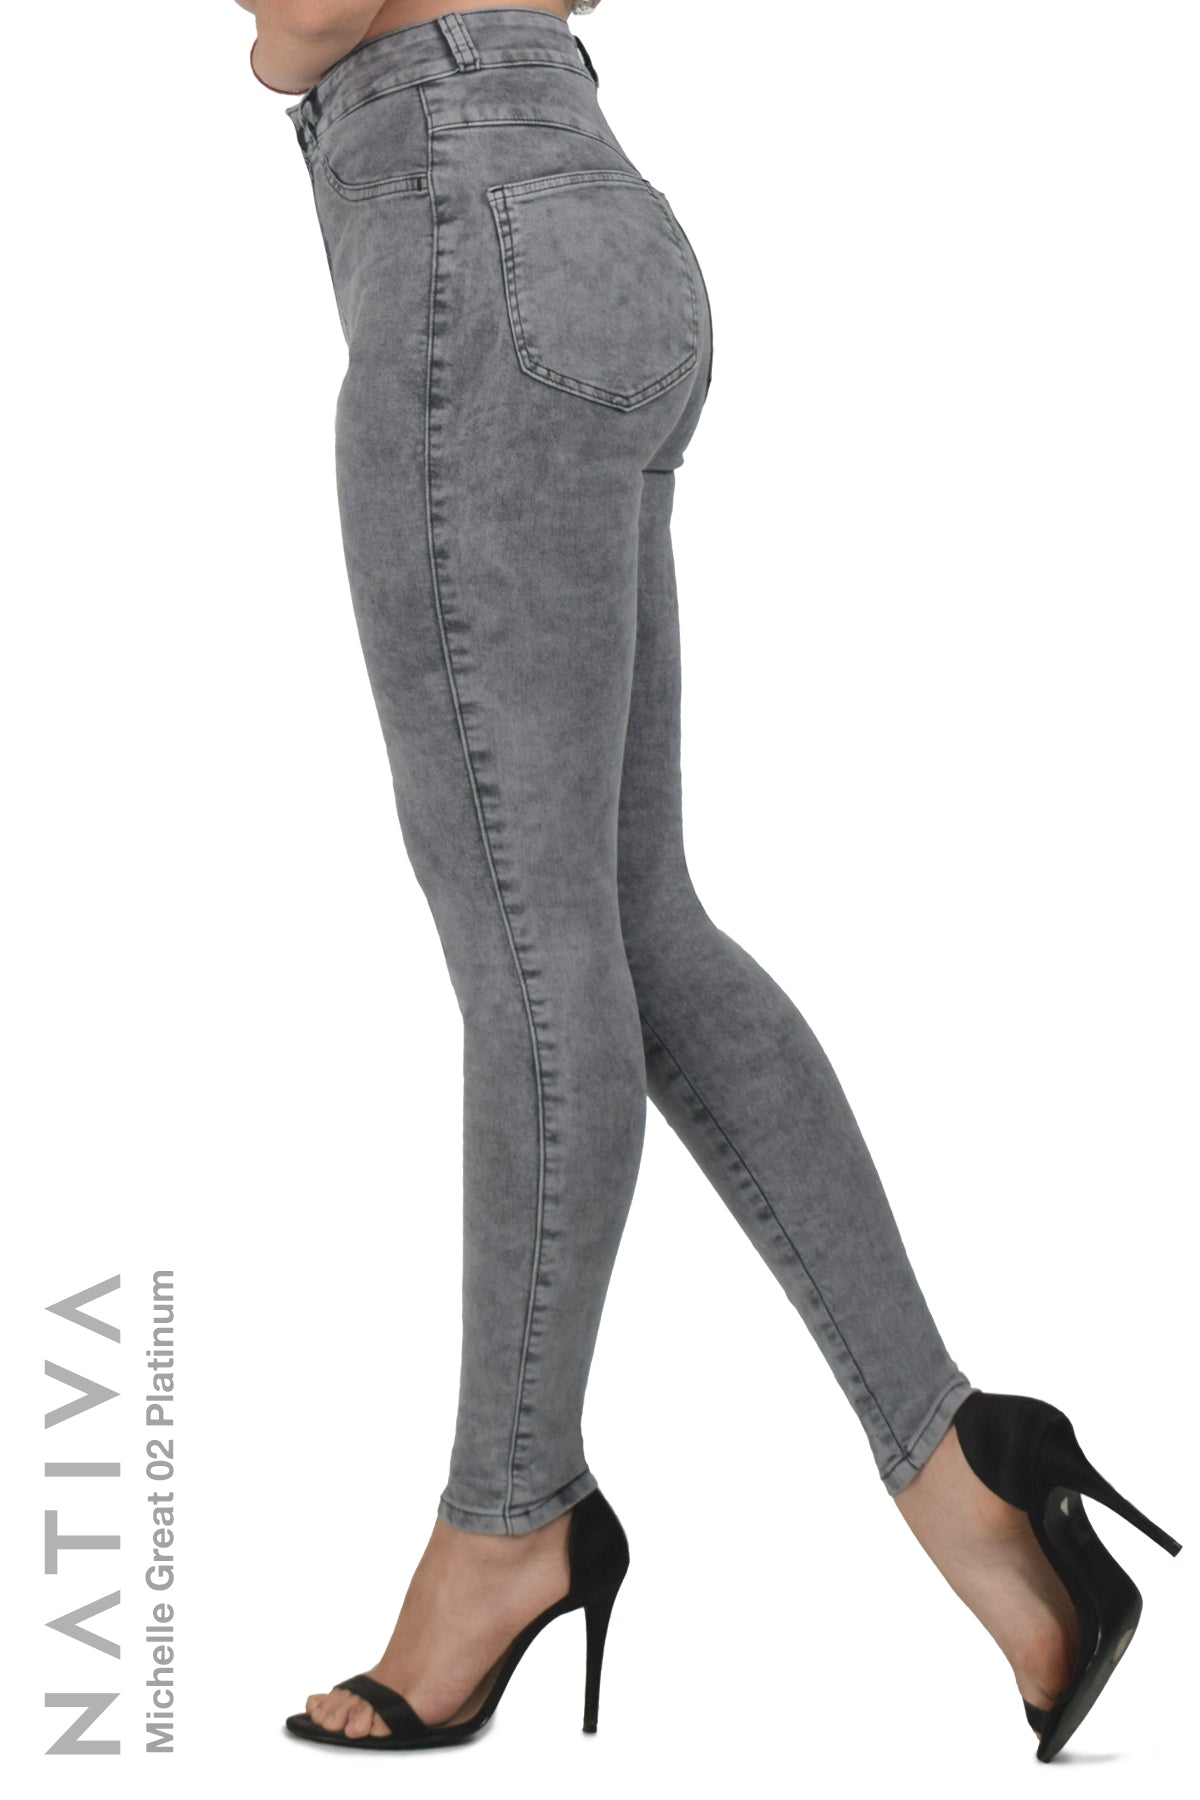 NATIVA, STRETCH JEANS. MICHELLE GREAT 02 PLATINUM, High Shaping Capaci